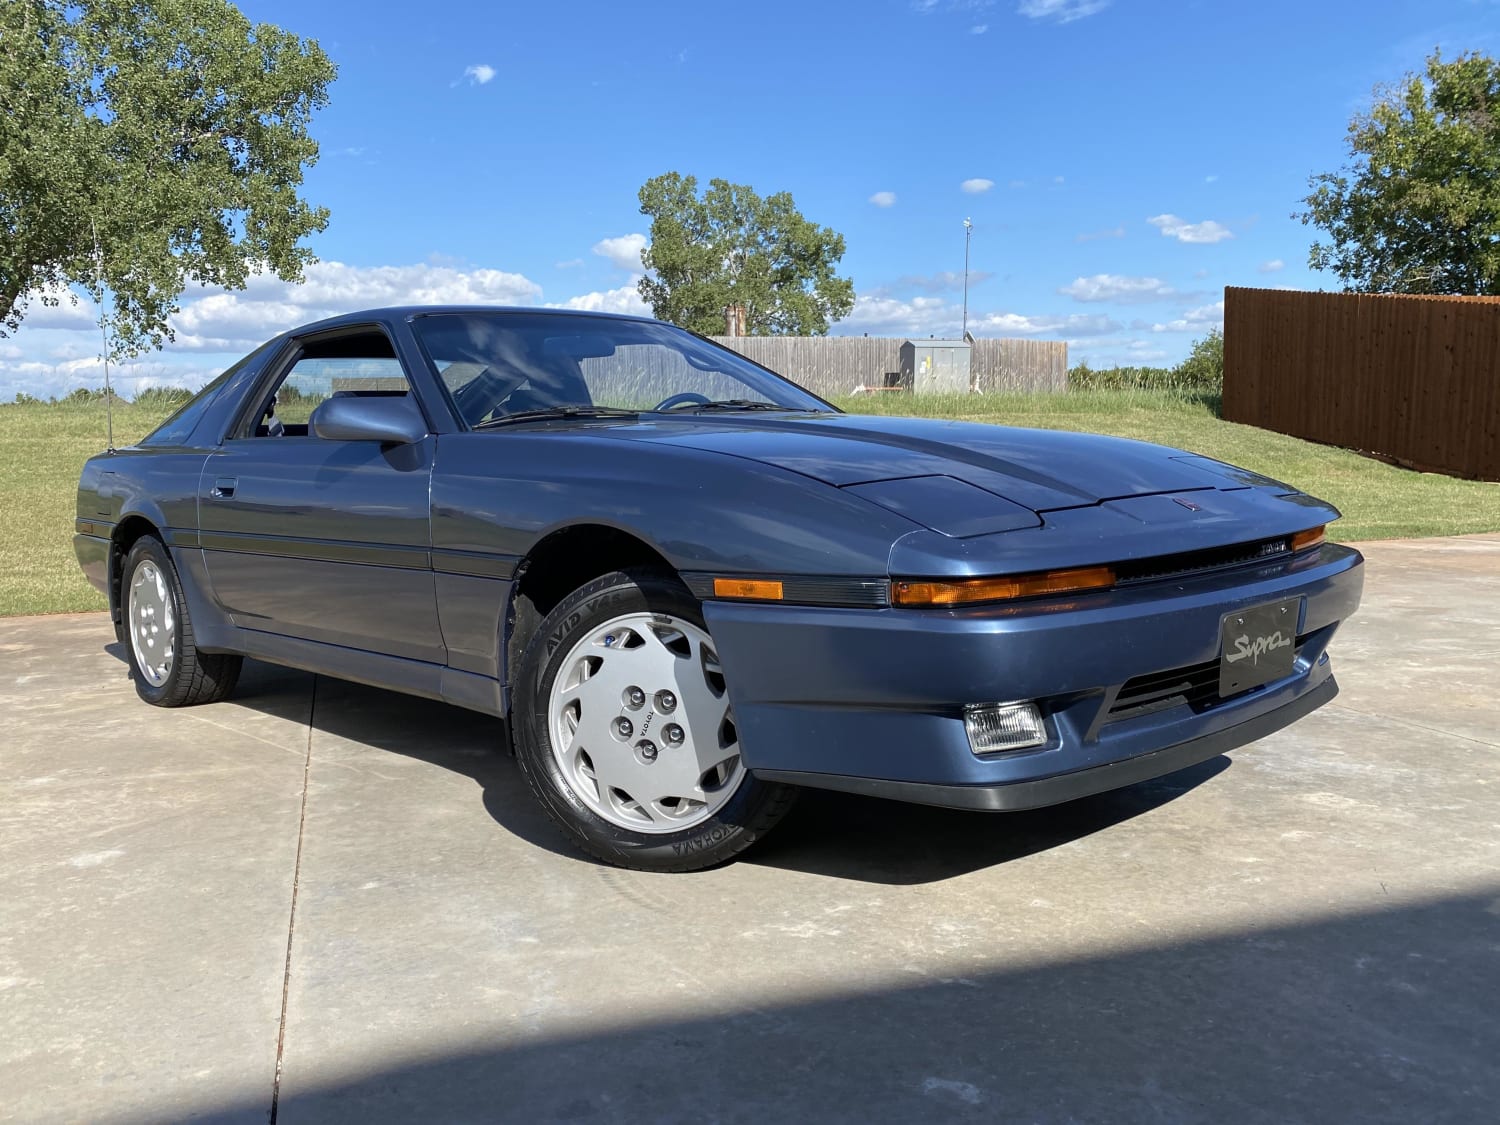 Well... I did a thing... This N/A 1986 Toyota Supra 5spd with 42,000 original miles was my dream car when I started driving in 1985... This is a bucket list car for me... I drove it for the first time on the way home and had a absolute blast! It’s sooooo slow! 😂